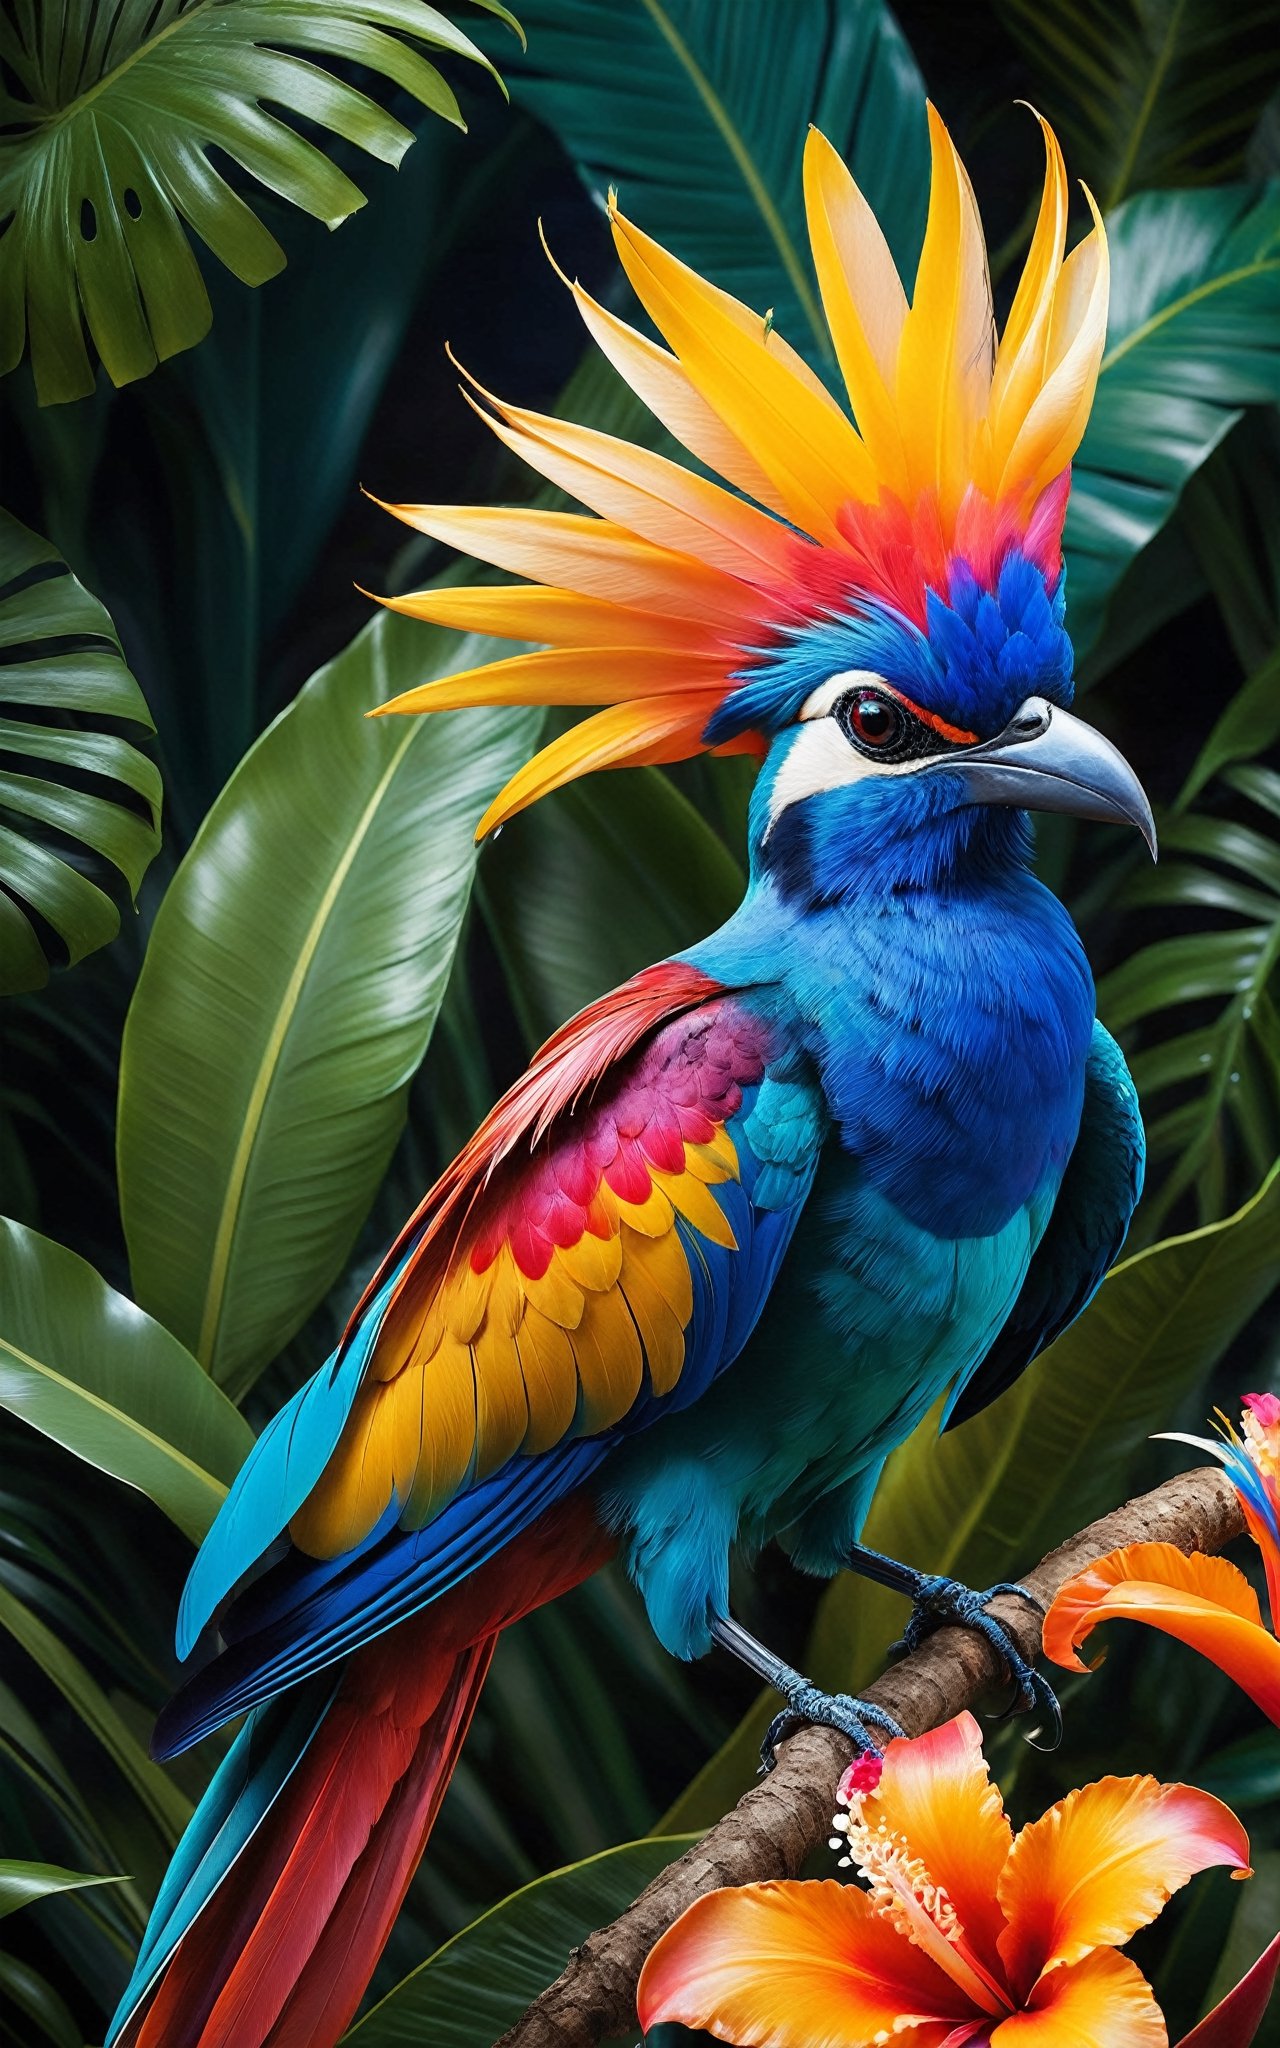 A breathtakingly beautiful tropical flower and a dazzling tropical bird are depicted in this stunning masterpiece. The intricate details of the tiny spirit female and the vibrant colors of the surroundings are captured with incredible precision in a wide-angle photograph of exceptionally sharp focus and high resolution. The image showcases the exquisitely delicate features of the flower and the mesmerizing plumage of the bird, creating a visual feast for the eyes. The high quality of this artwork allows viewers to fully appreciate the intricate beauty and colorful splendor of these tropical wonders.,Digital painting 